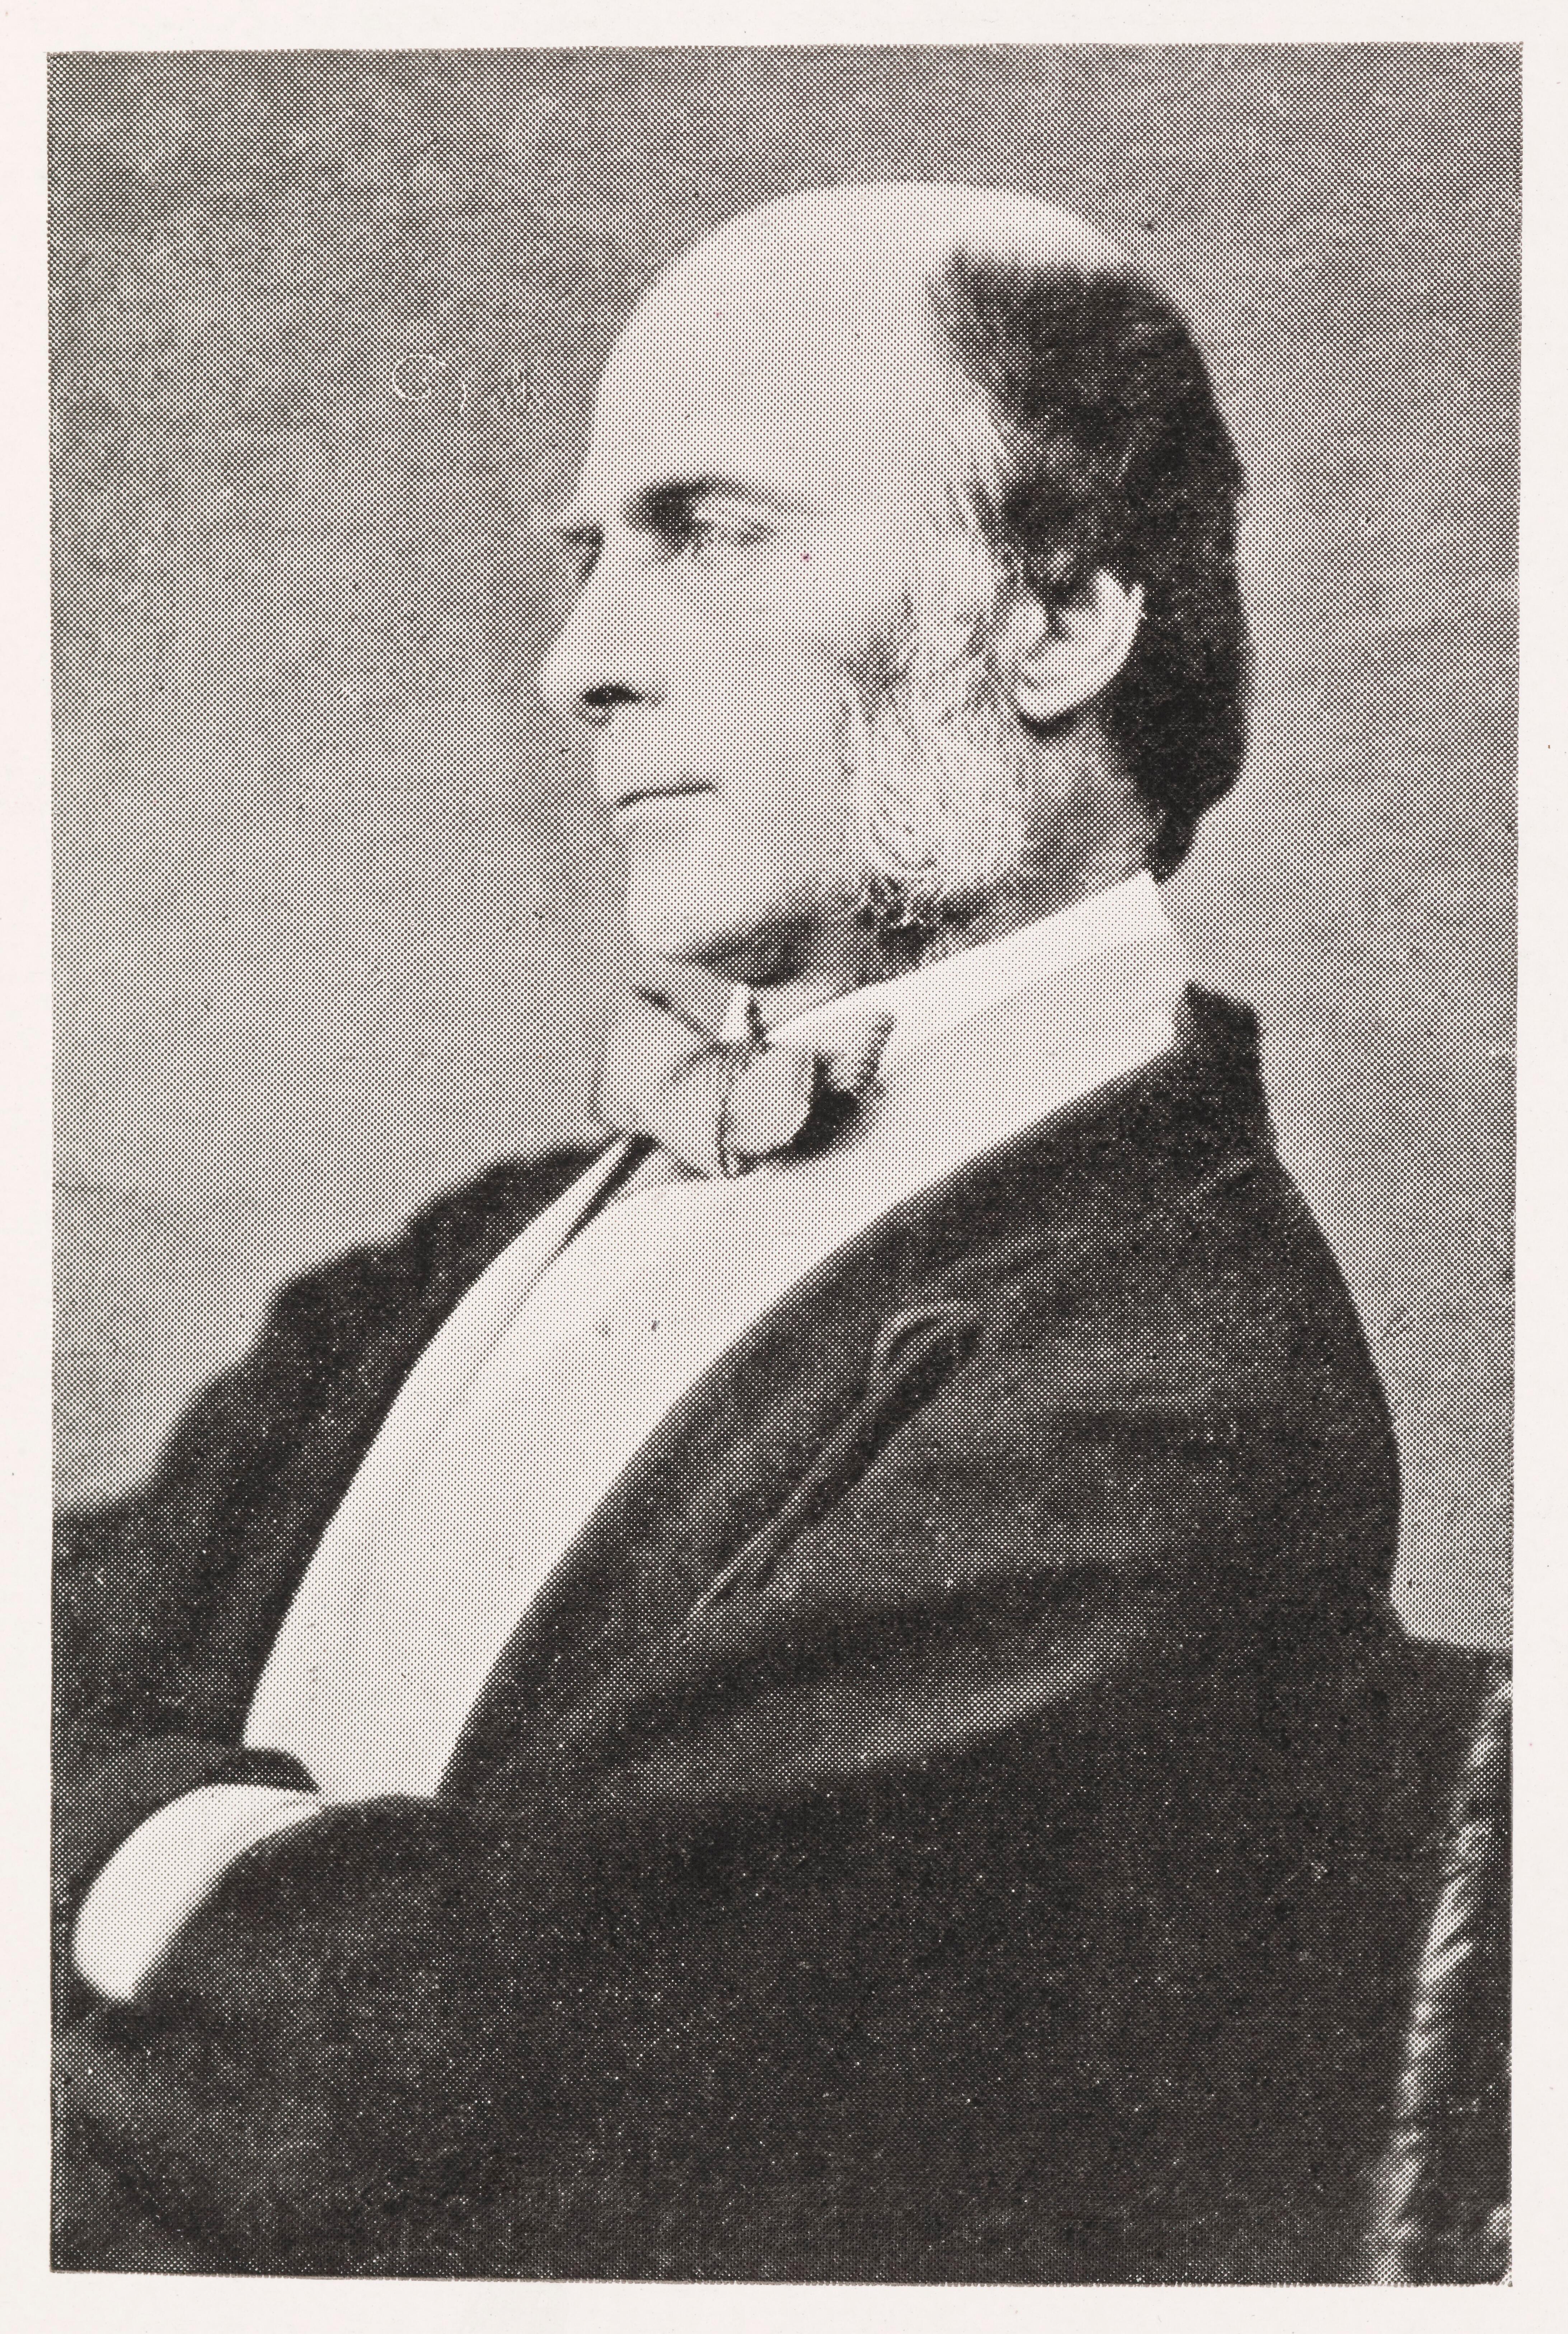 Black and white photo portrait of Francis Galton, shows a white man in profile from the waist up in a bow tie. He has black hair, is bald on the top of his head and white mutton chops.